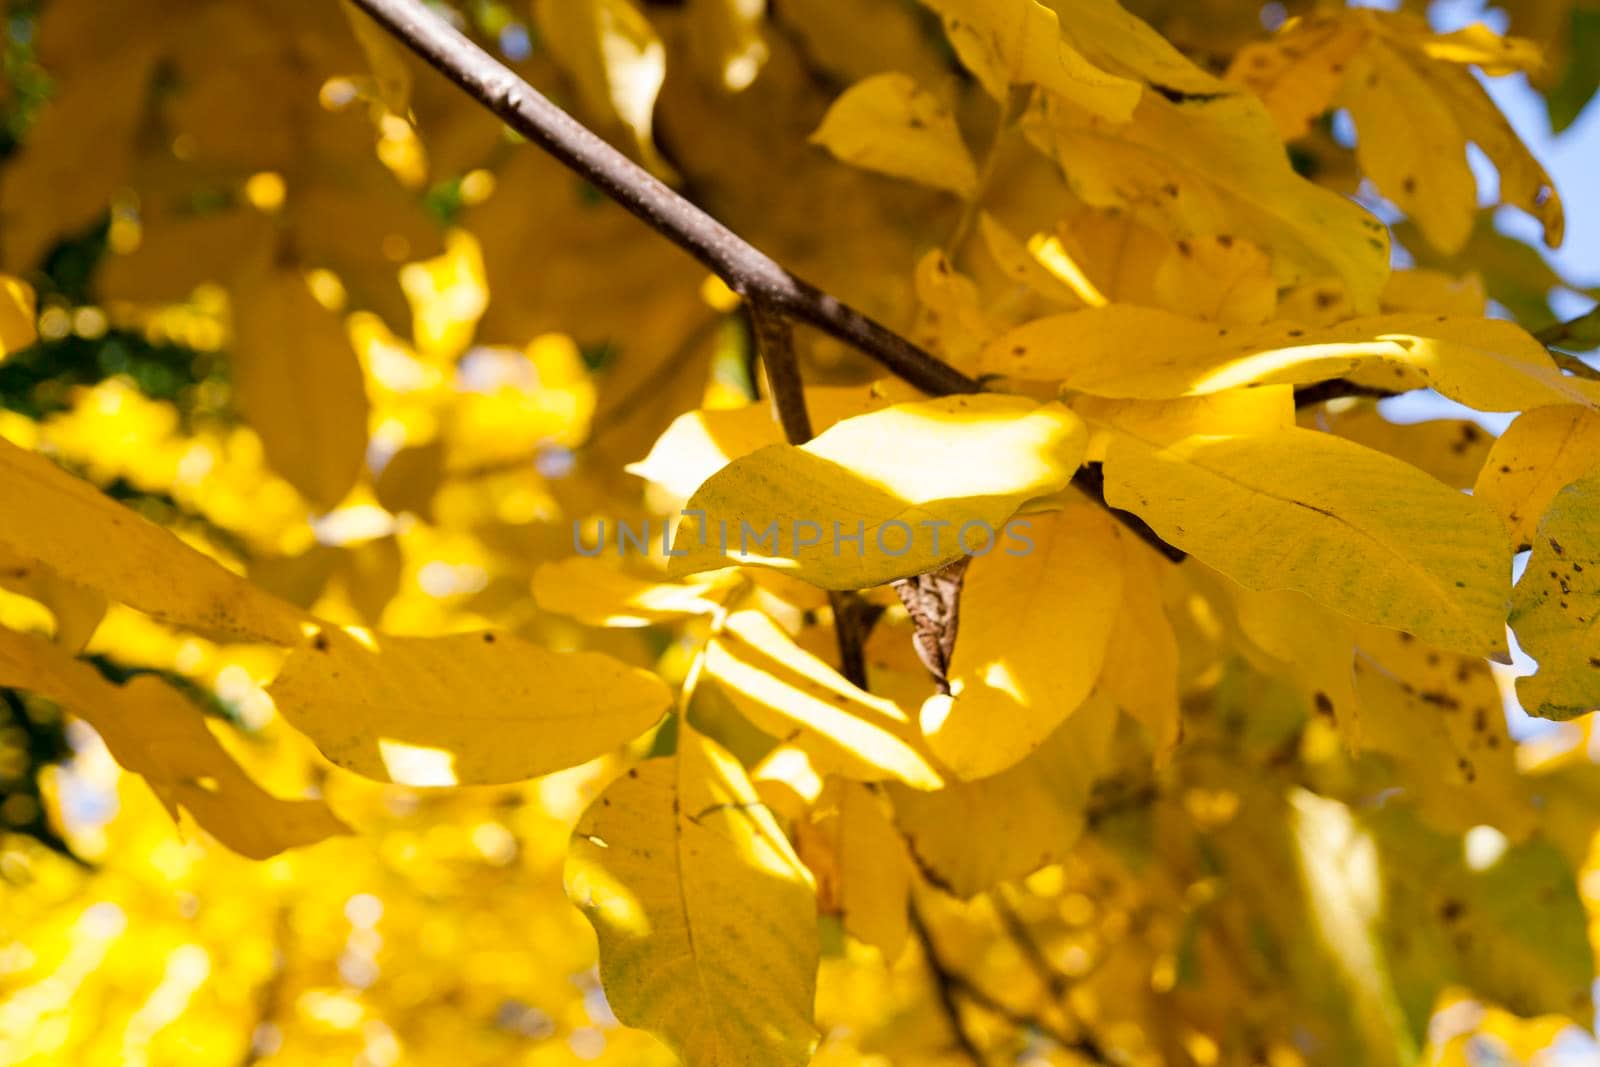 The sun's rays in the yellowed leaves of a nut